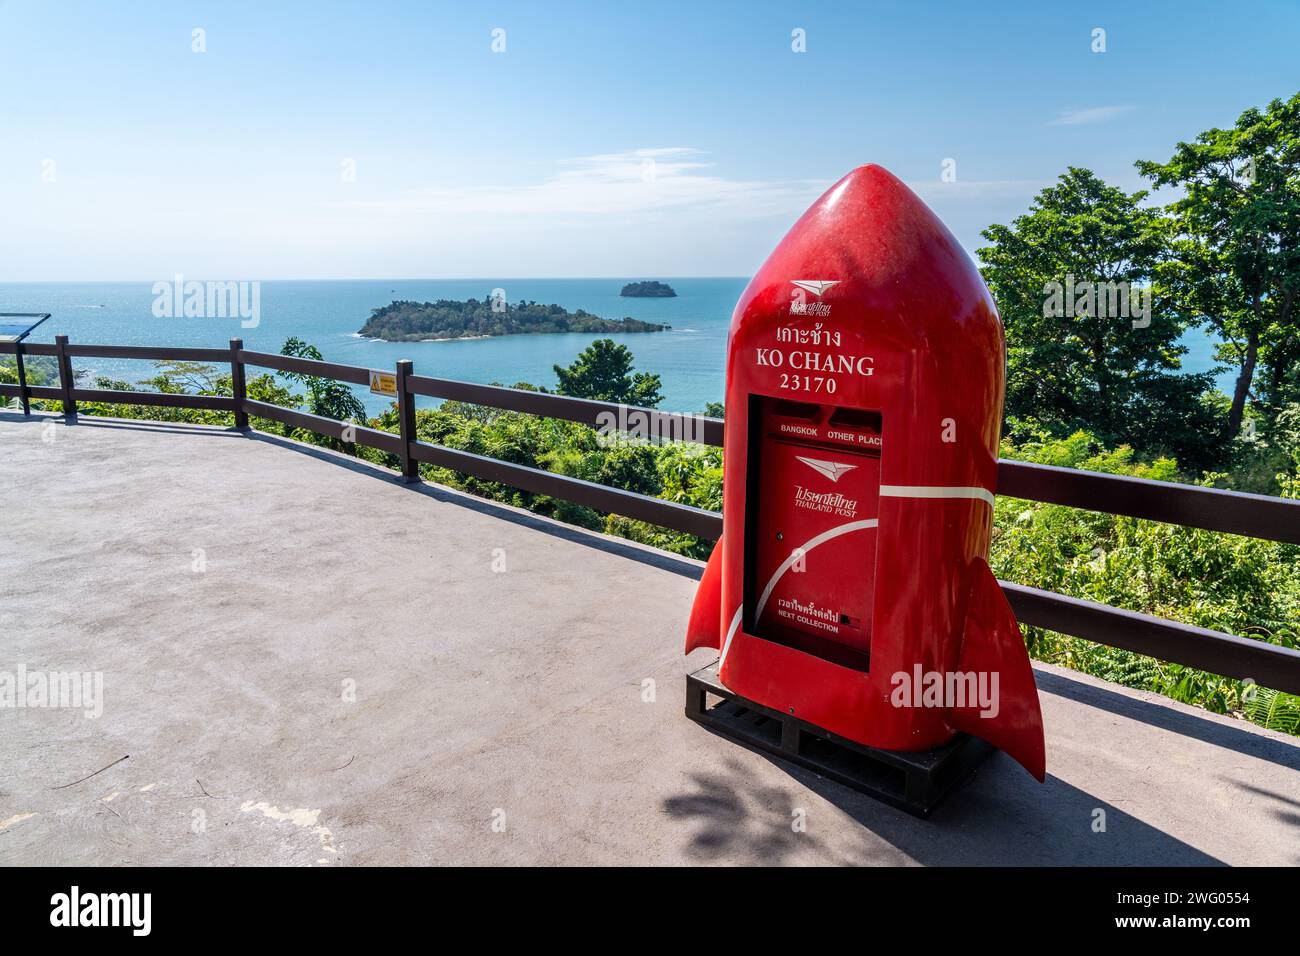 Koh Chang, Trad, Thailand - January 25, 2024 - Red post box in rocket shape standing at the ocean view point on Koh Chang island in Trad, Thailand Stock Photo